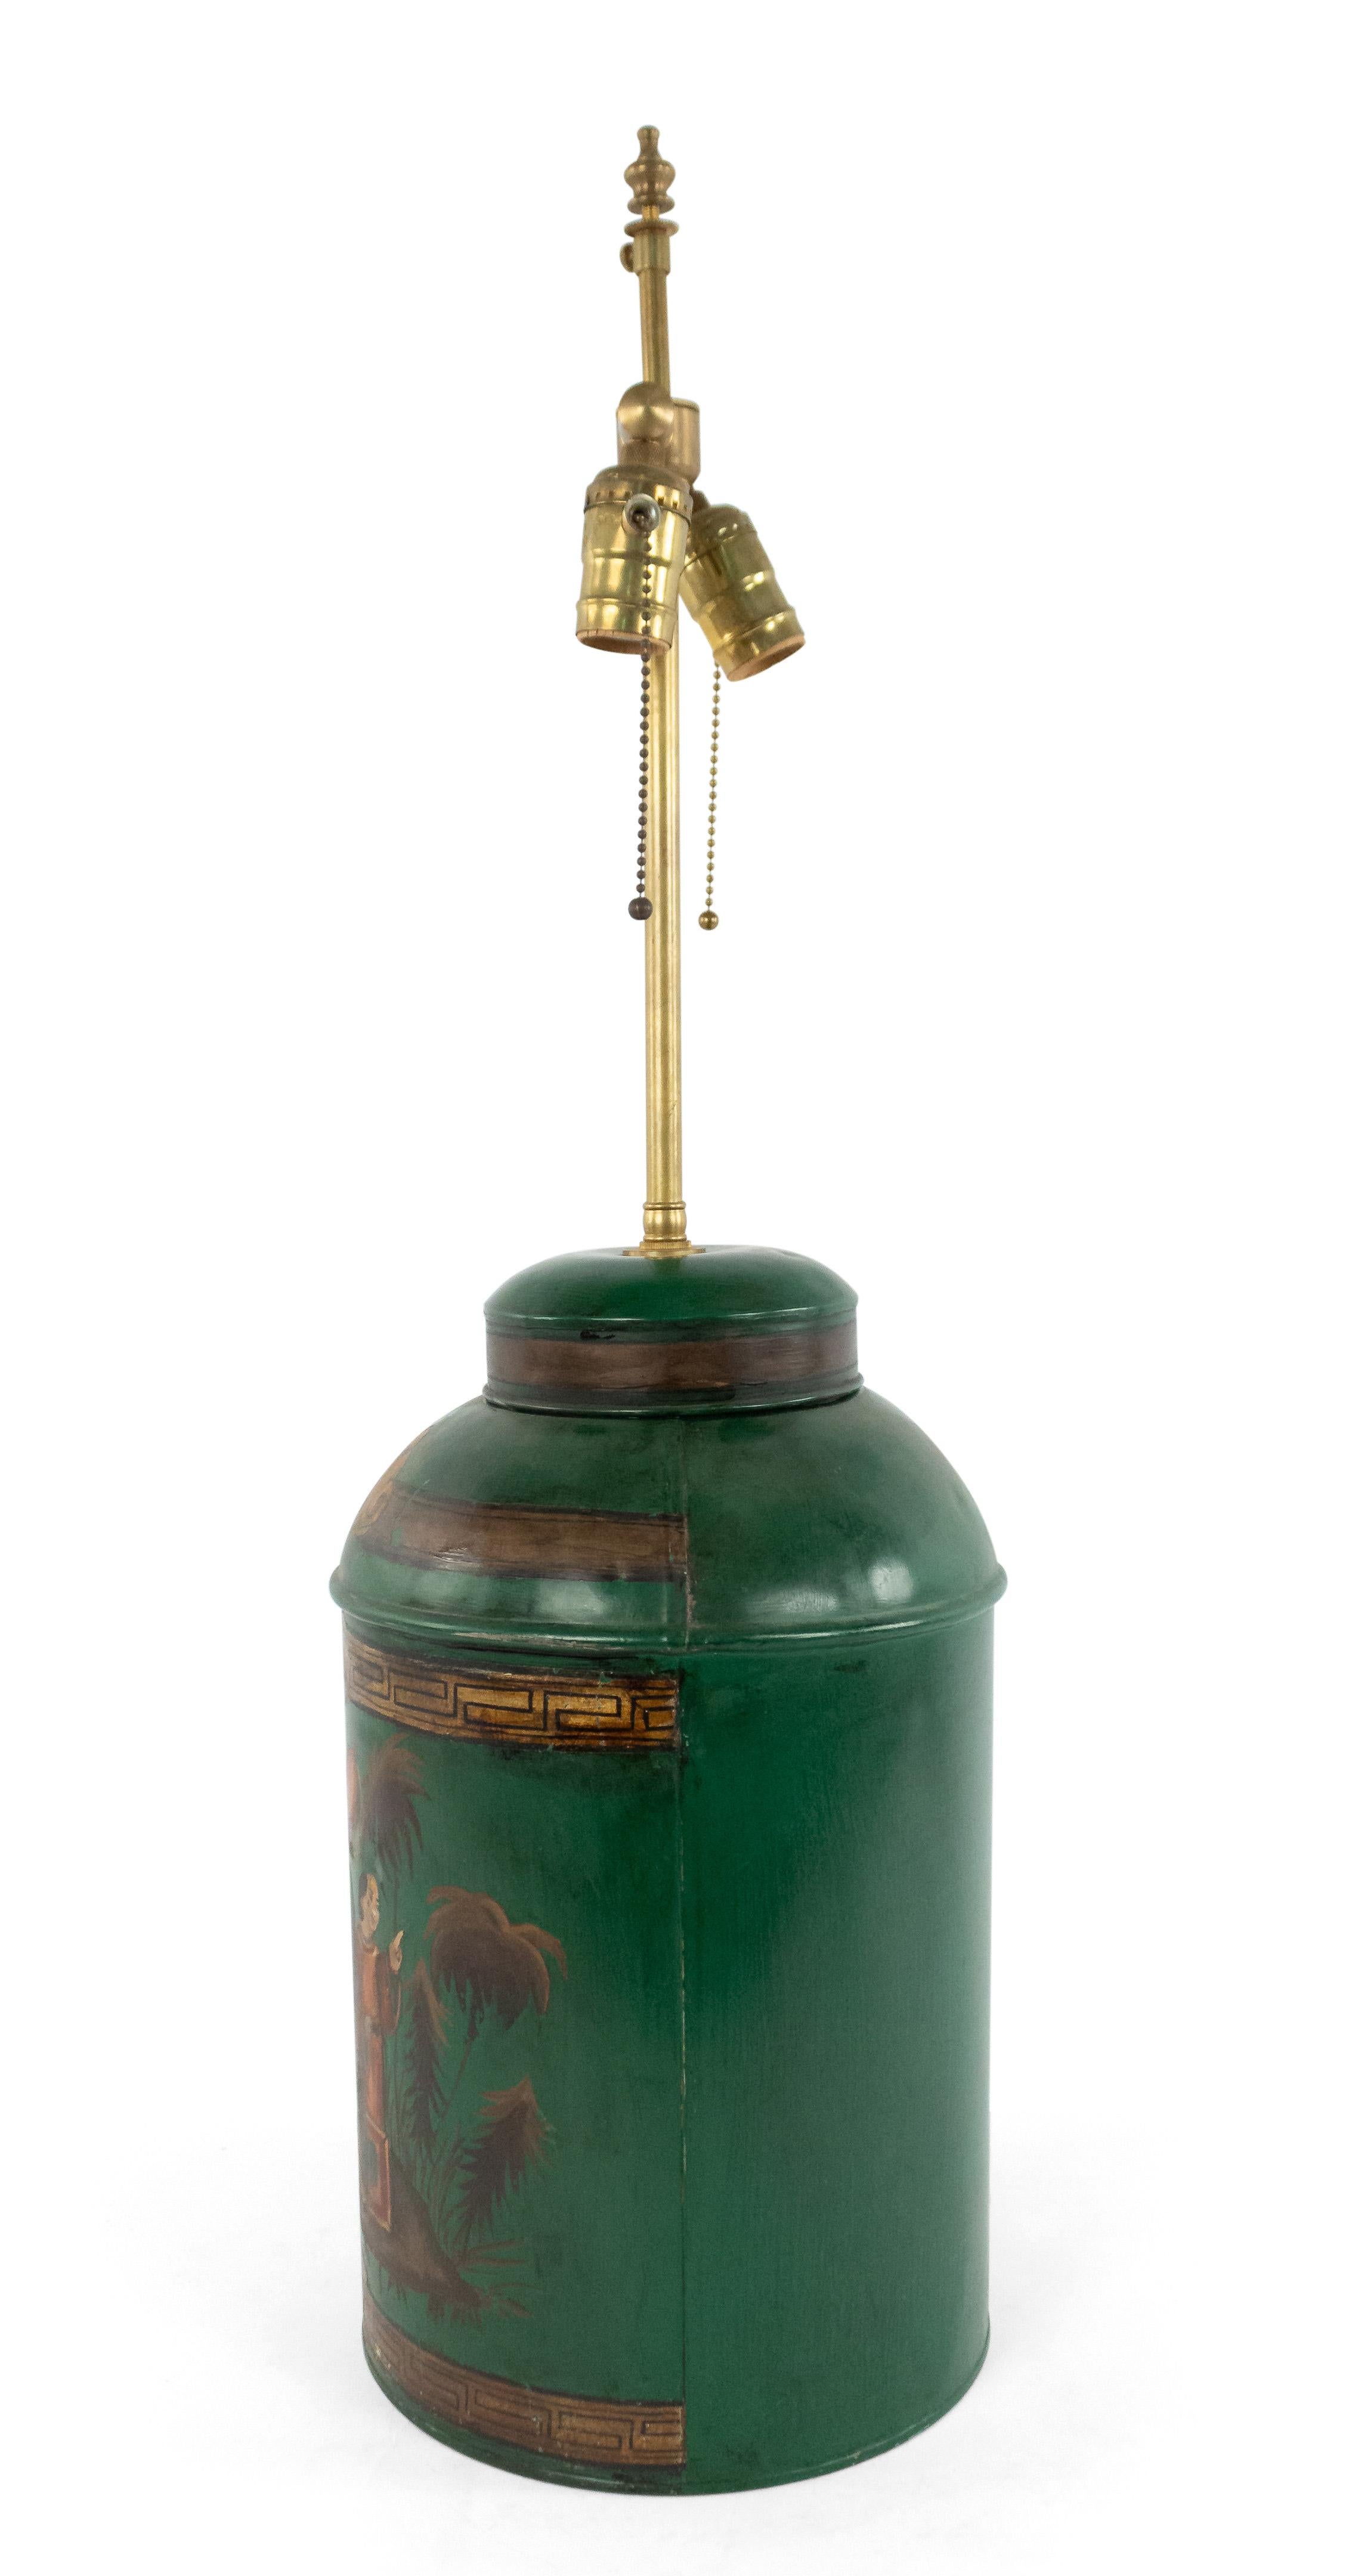 English Victorian style 20th century green tole and chinoiserie decorated tea canister mounted as a lamp.